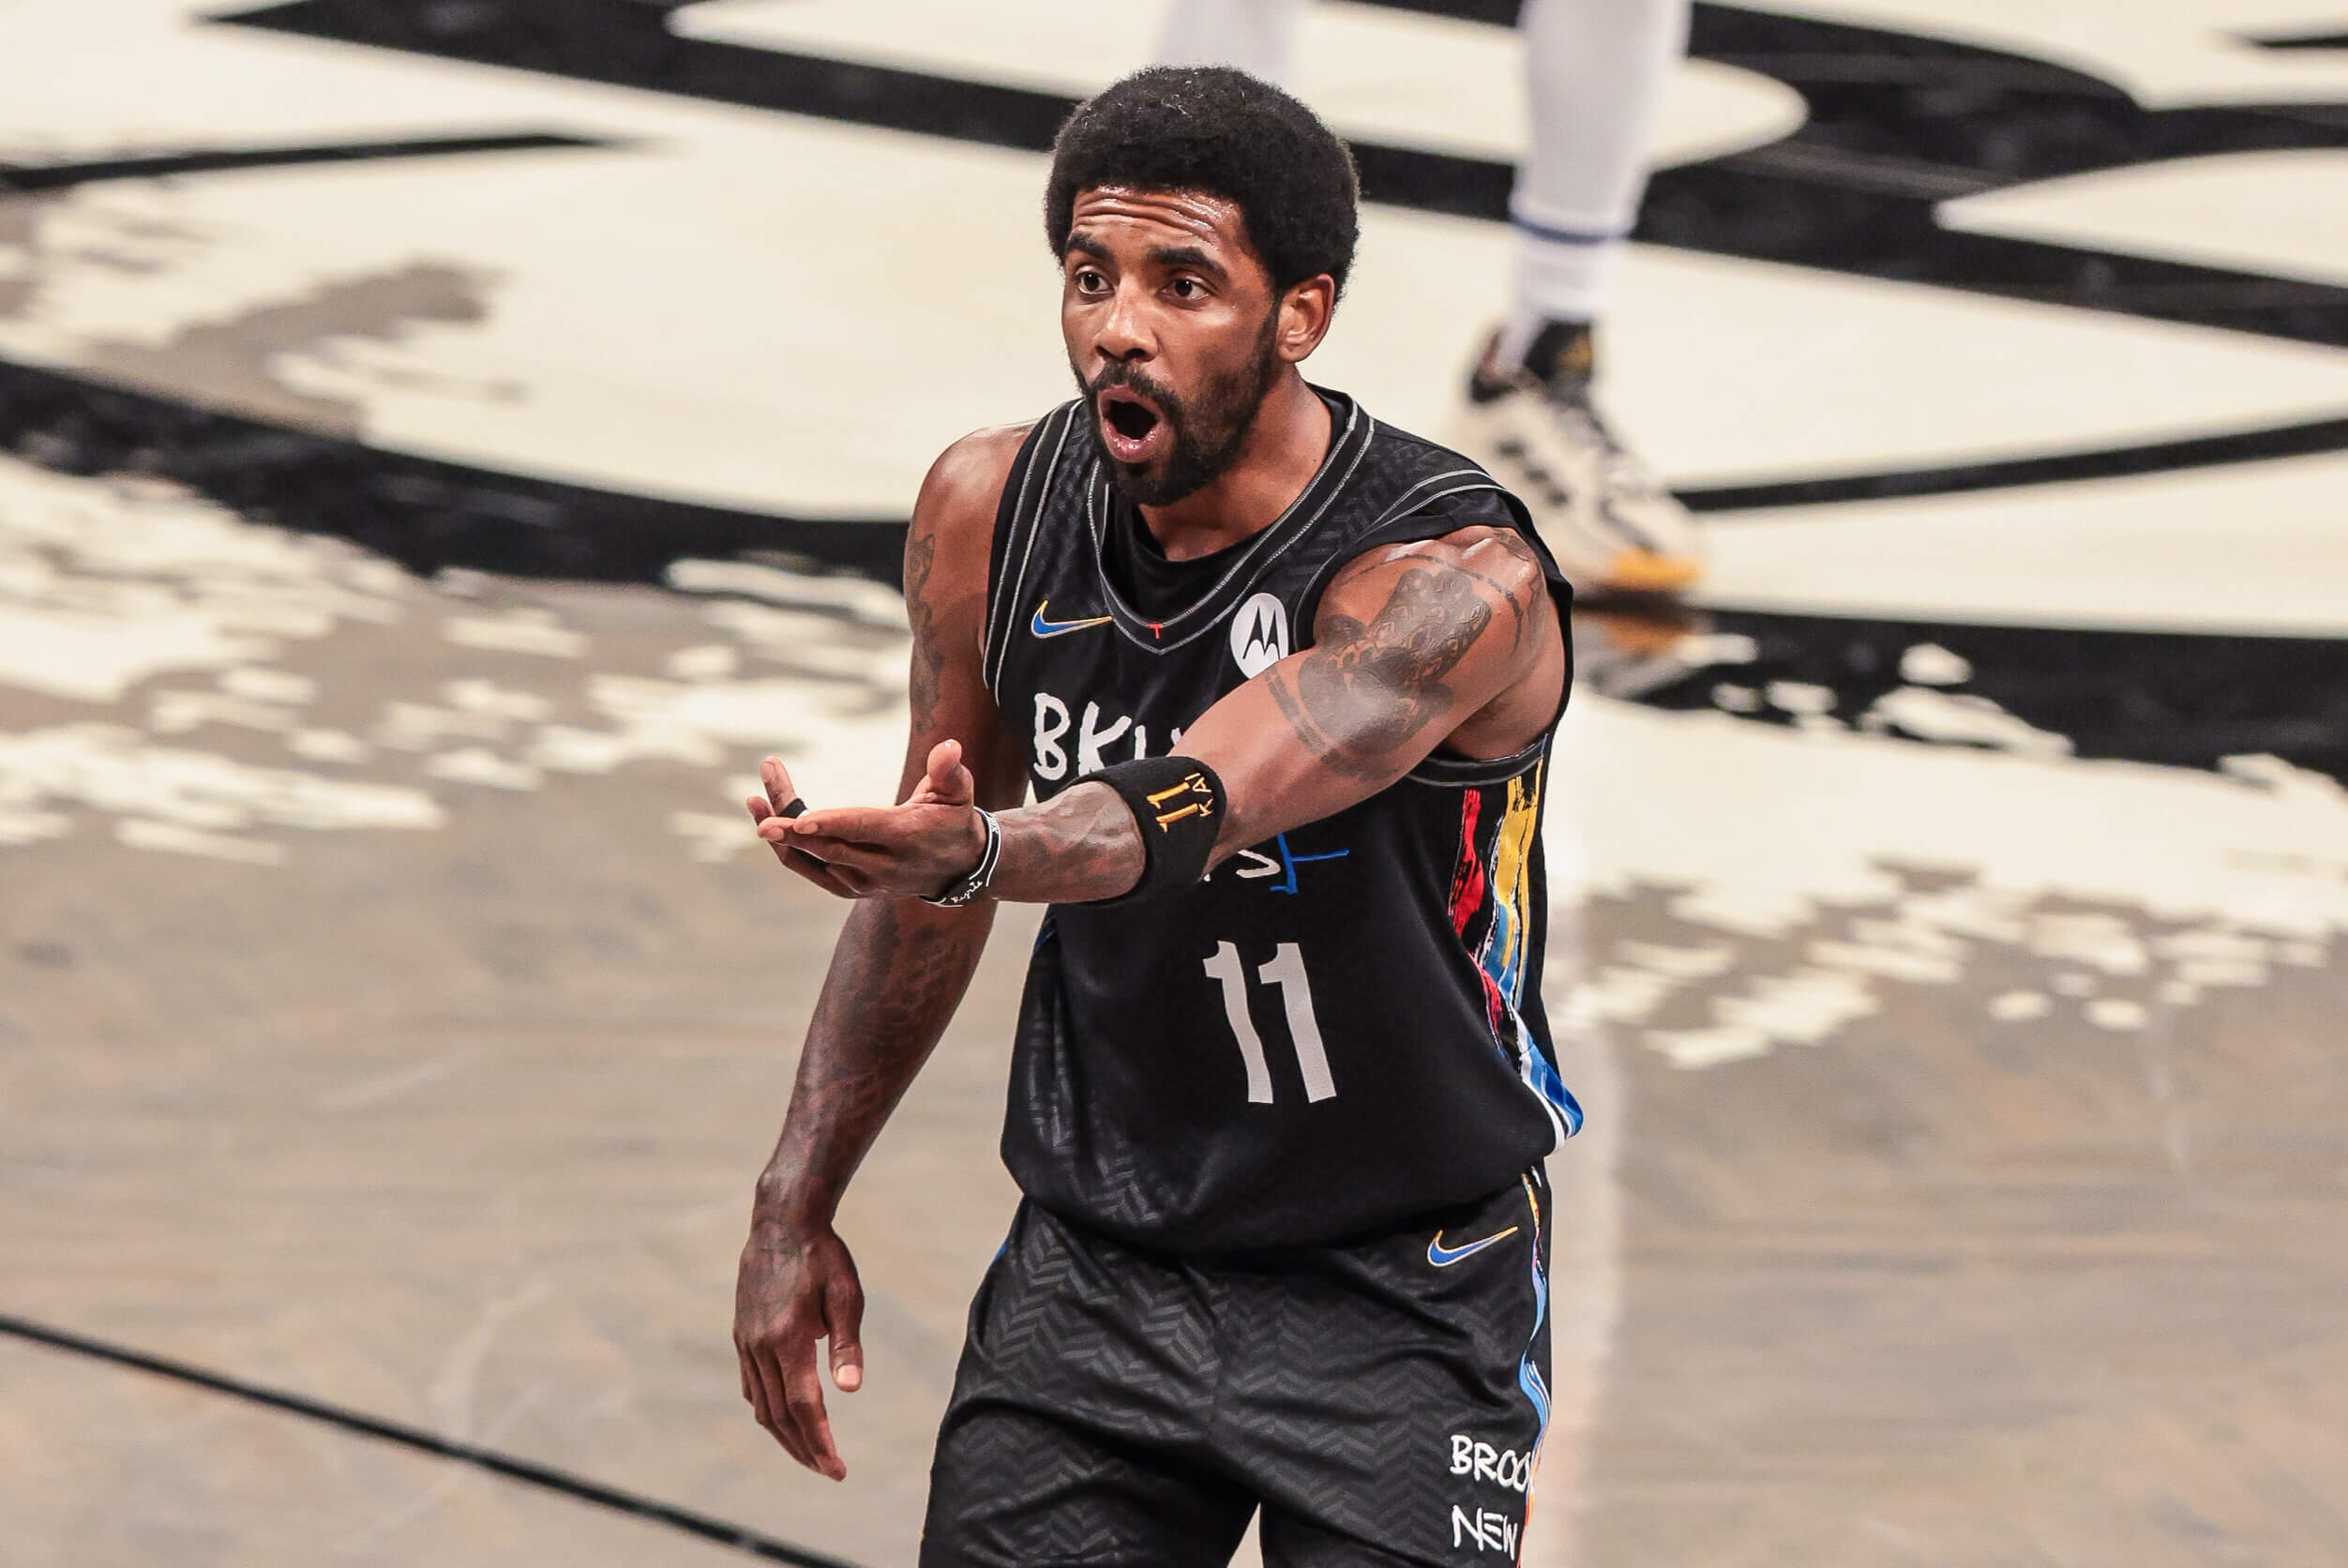 Kyrie Irving attends Nets' outdoor practice, but long-term availability  remains unclear - Newsday